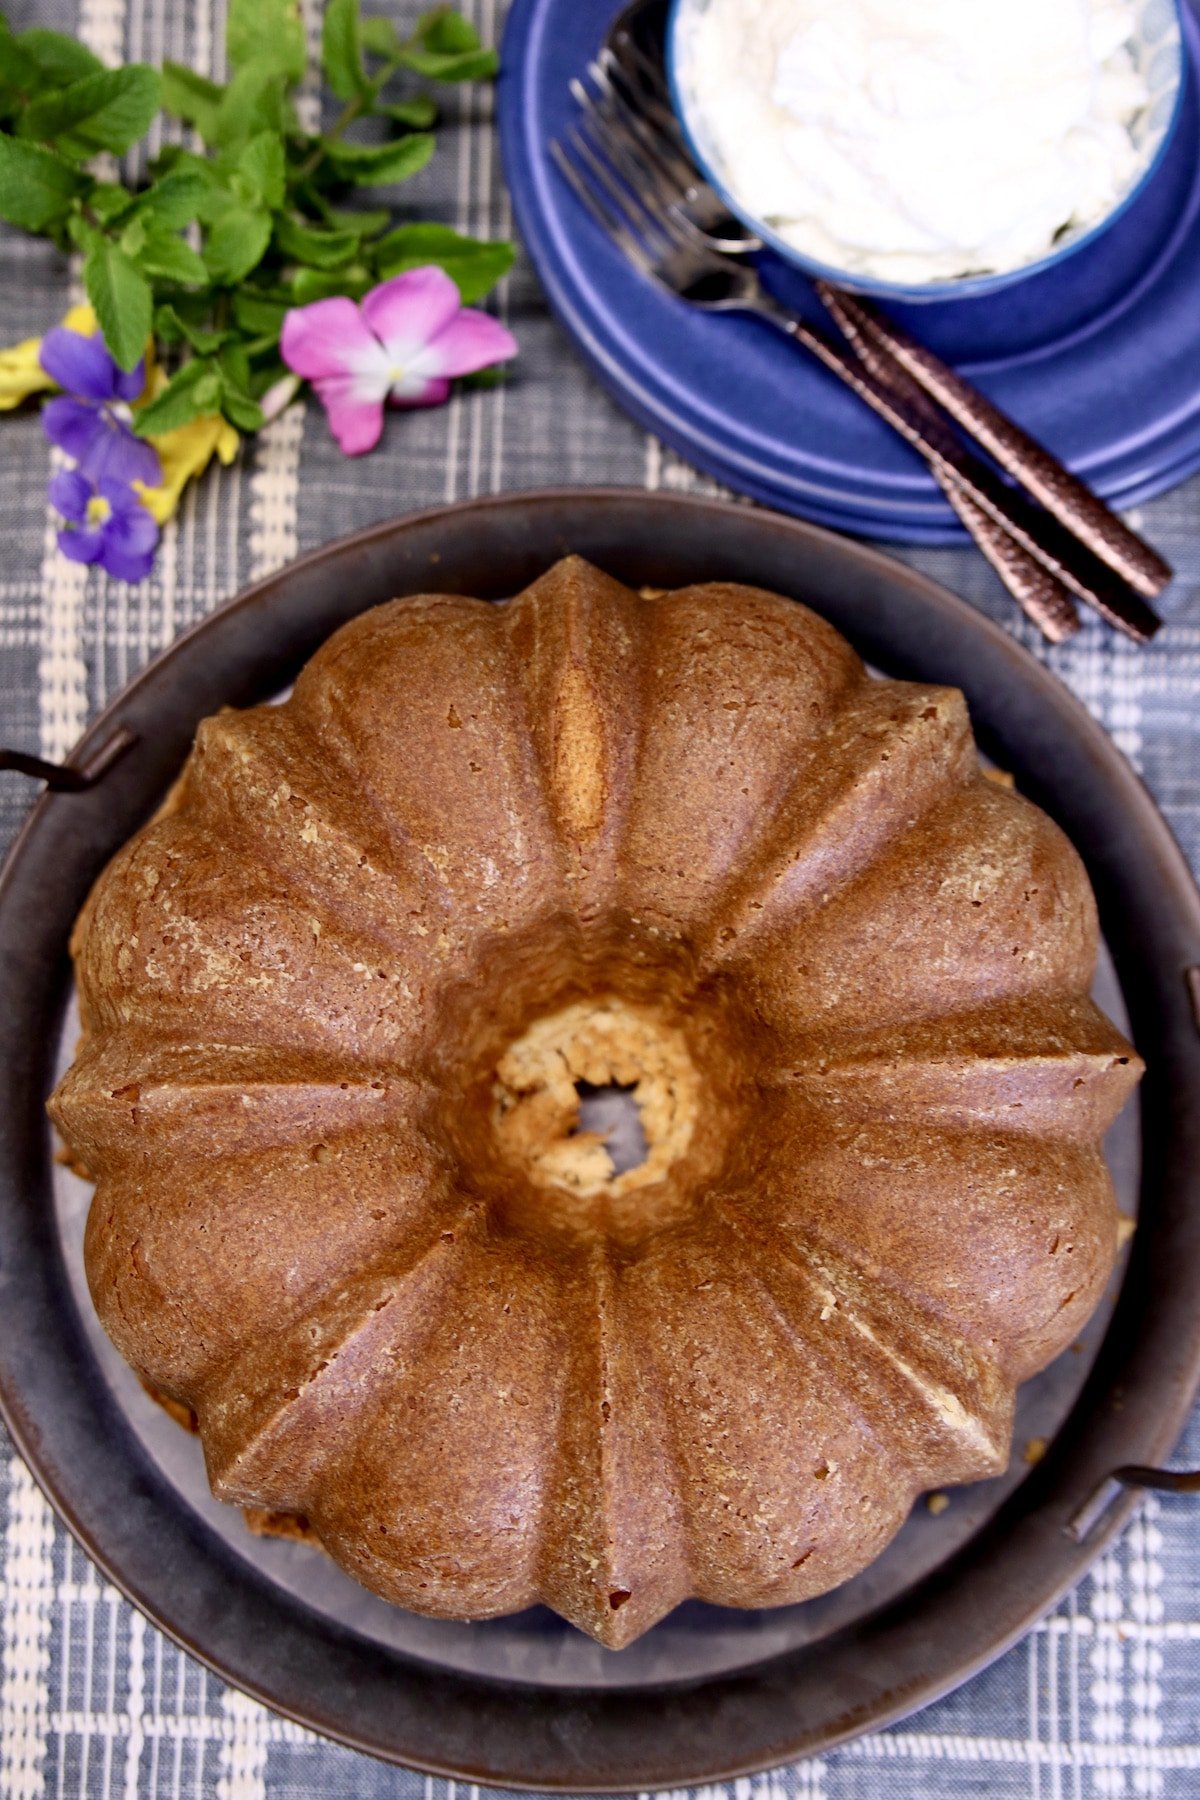 Overhead view of whole bundt cake.